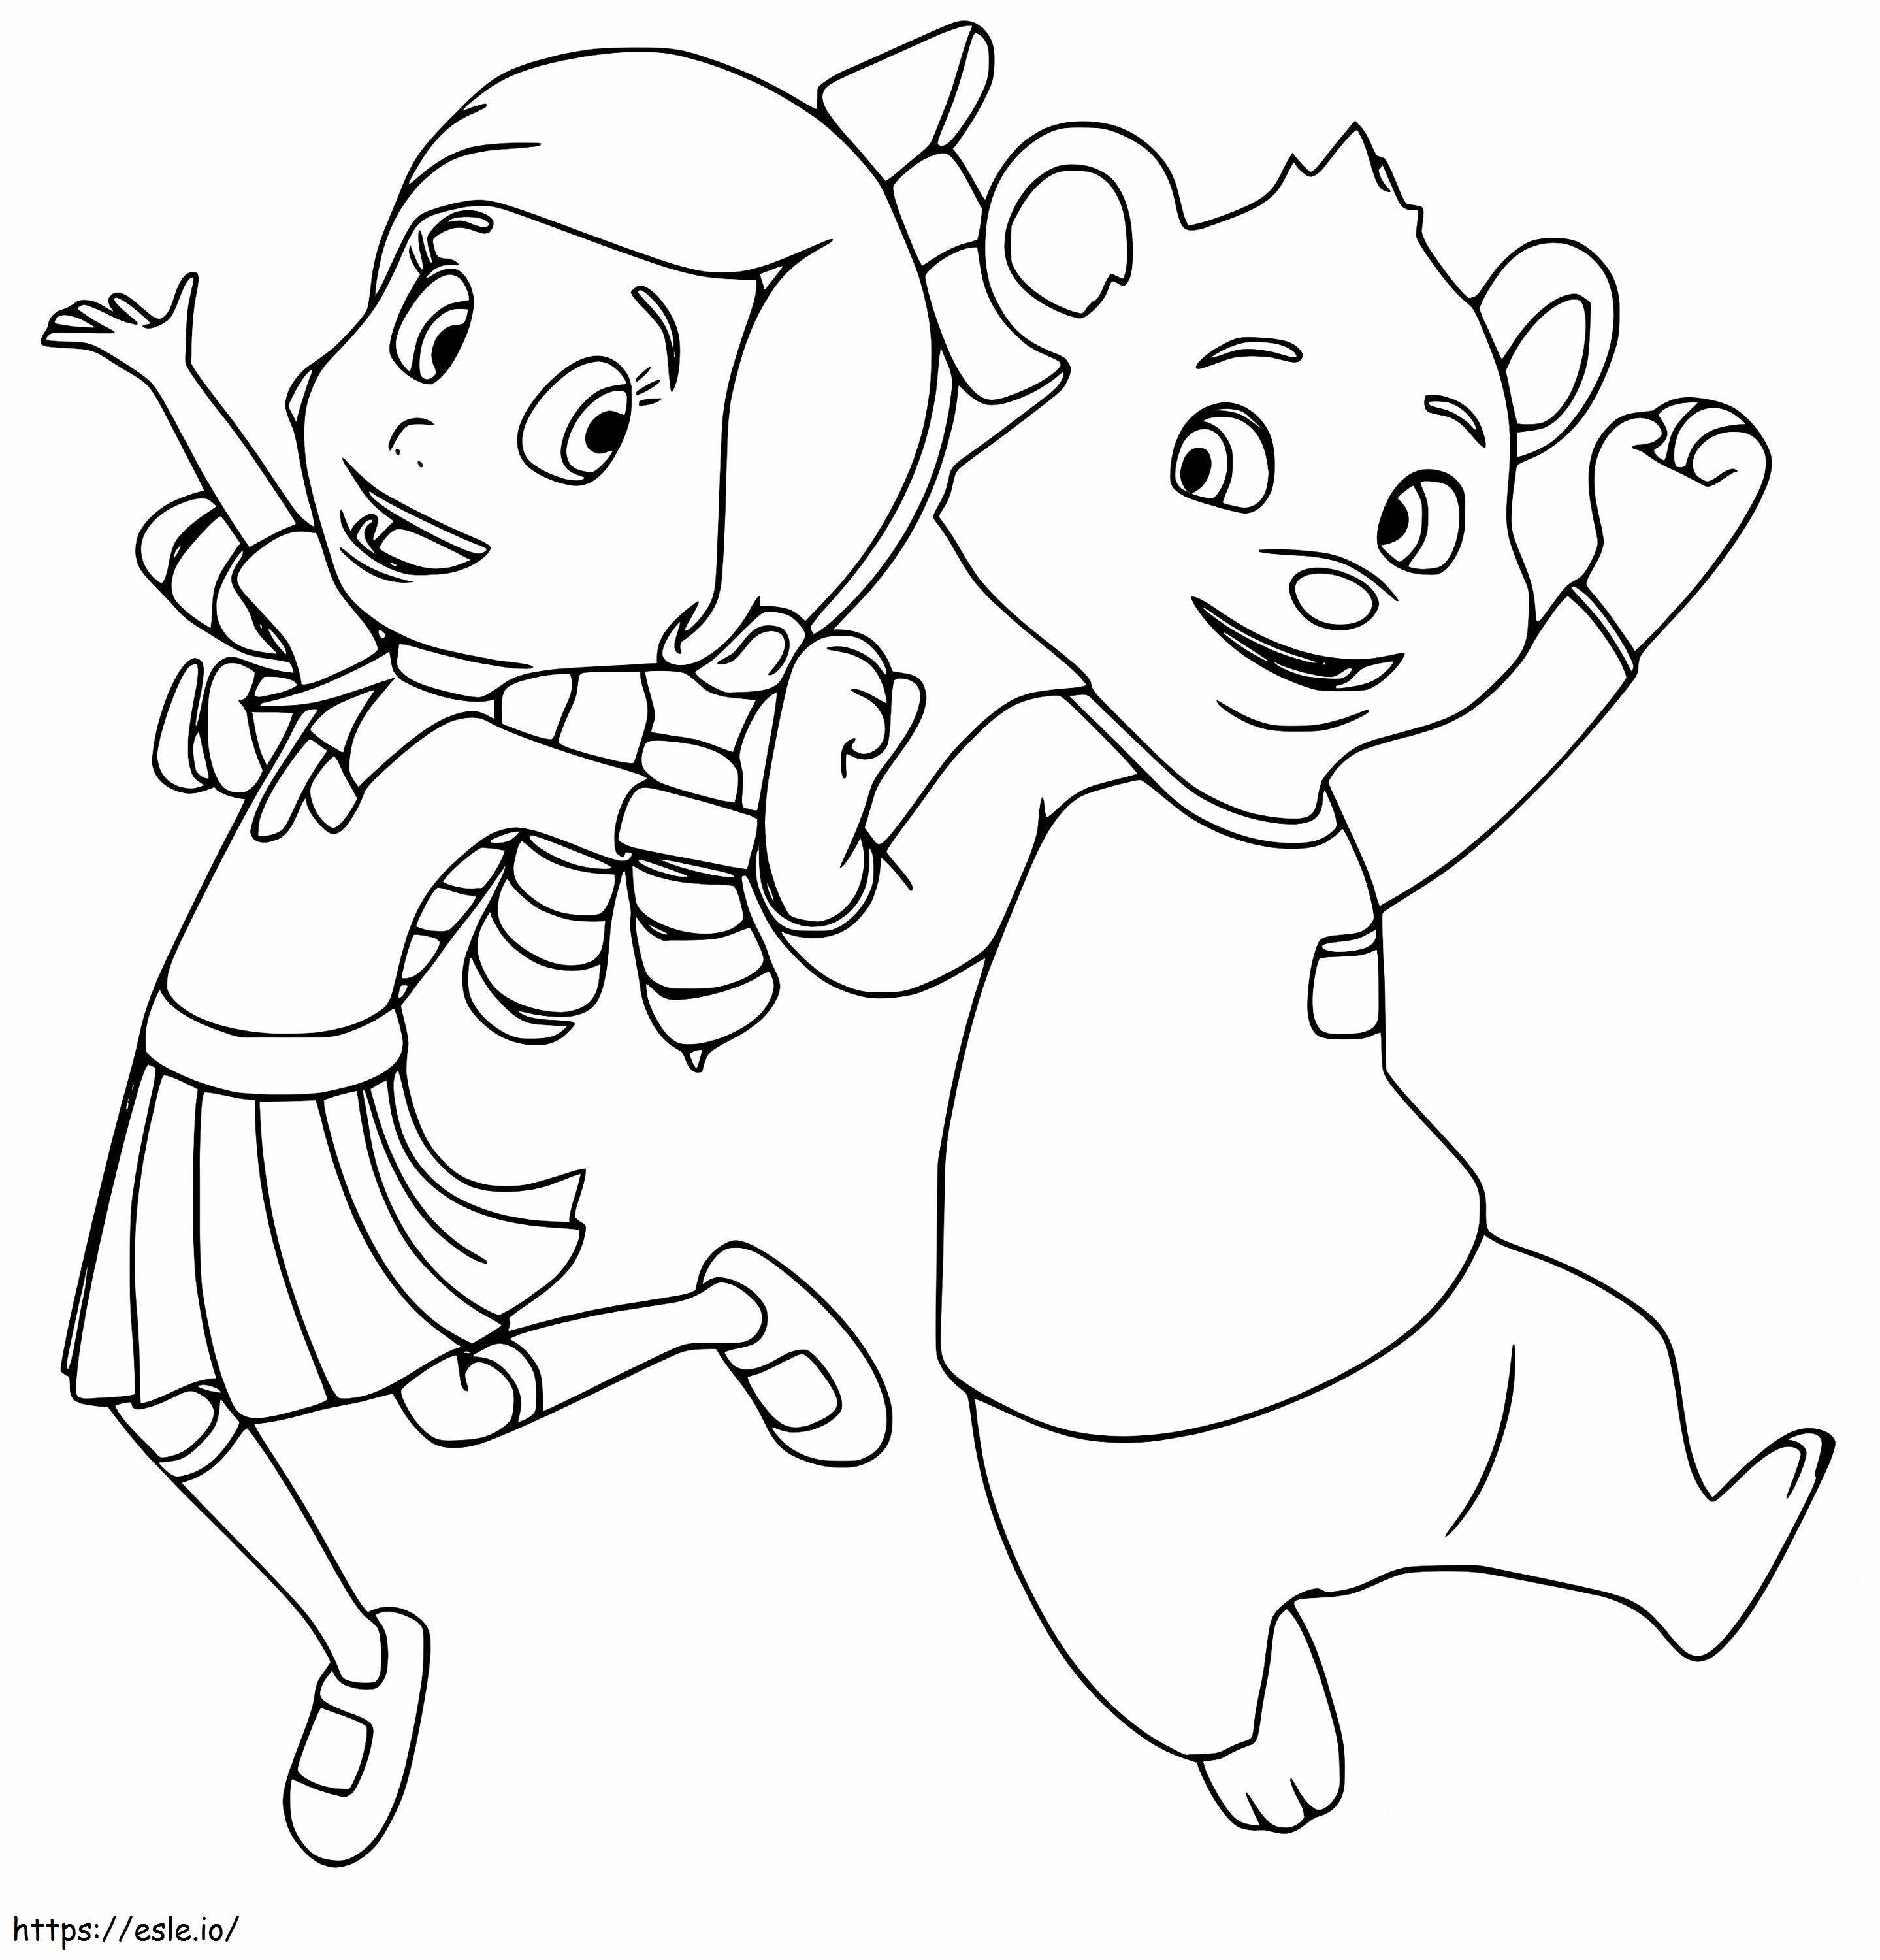 Goldie And Jack A Bear coloring page